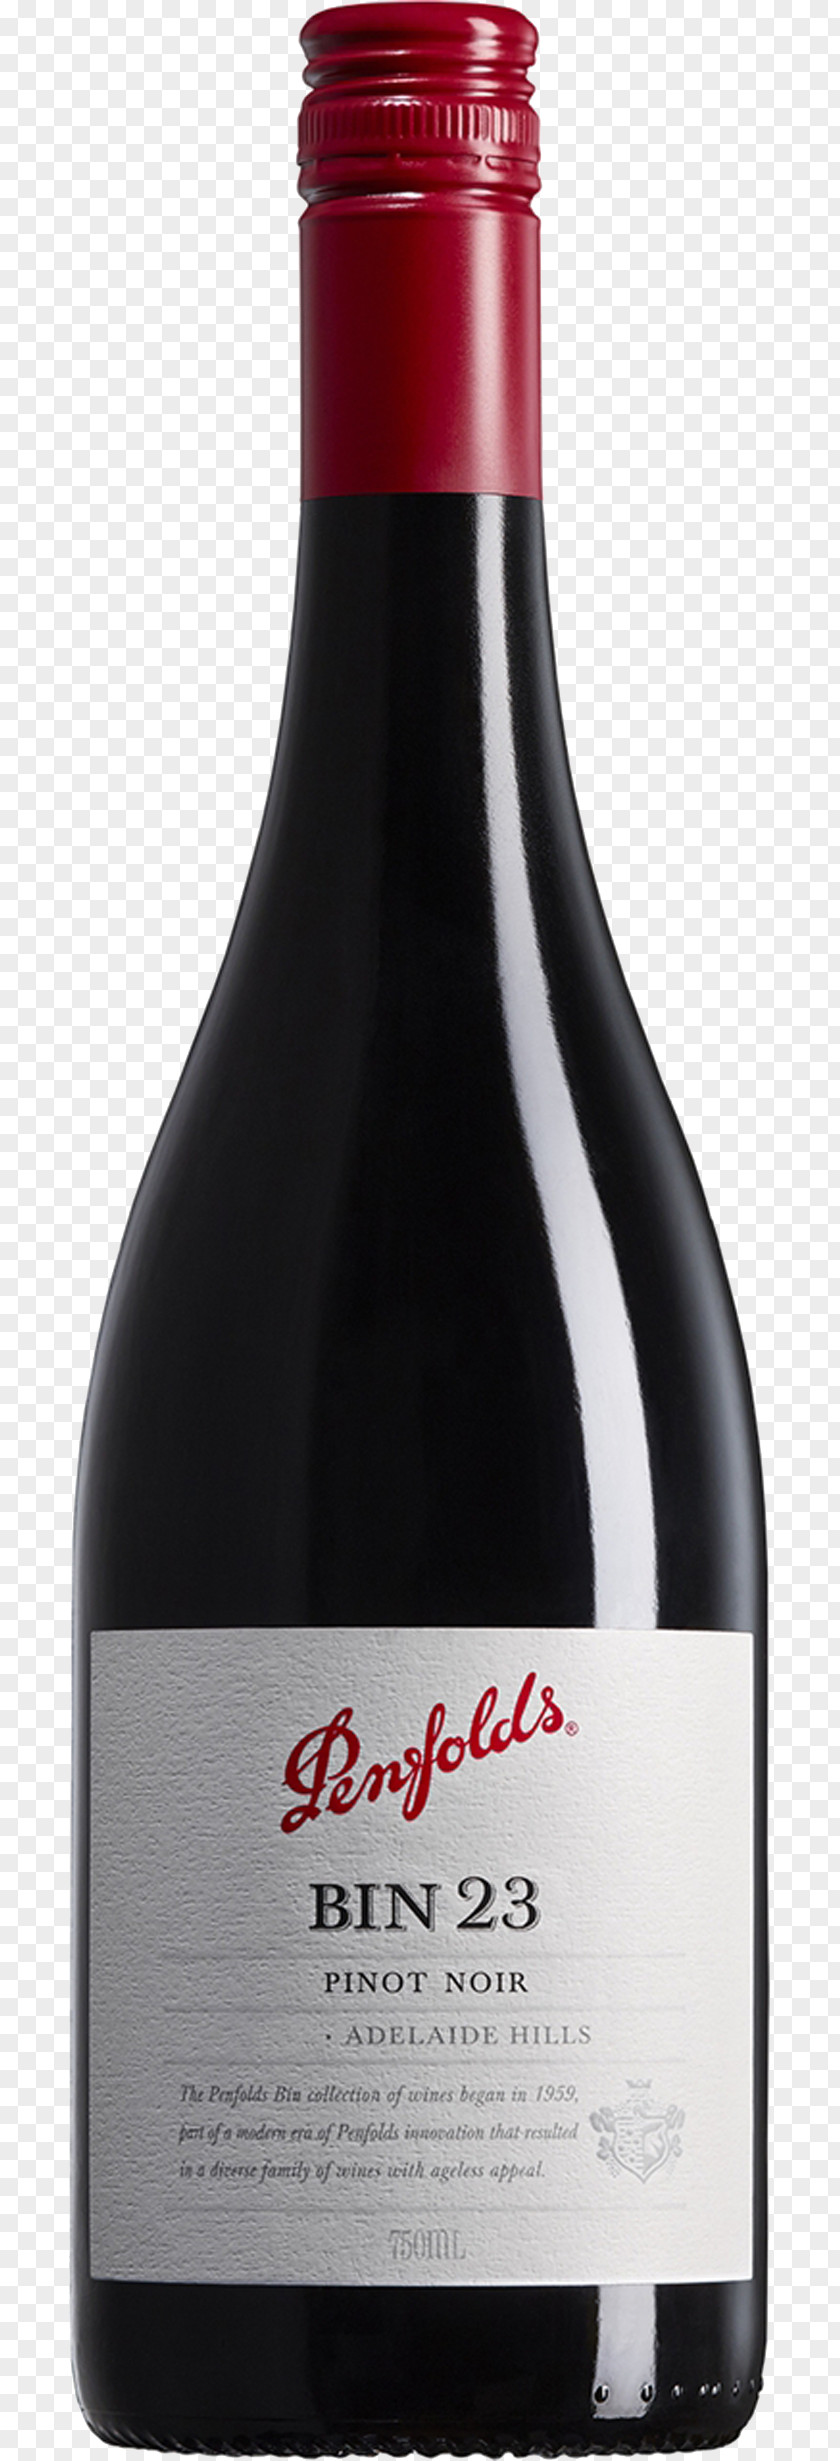 Wine Red Pinot Noir Cono Sur Vineyards & Winery Tannin PNG